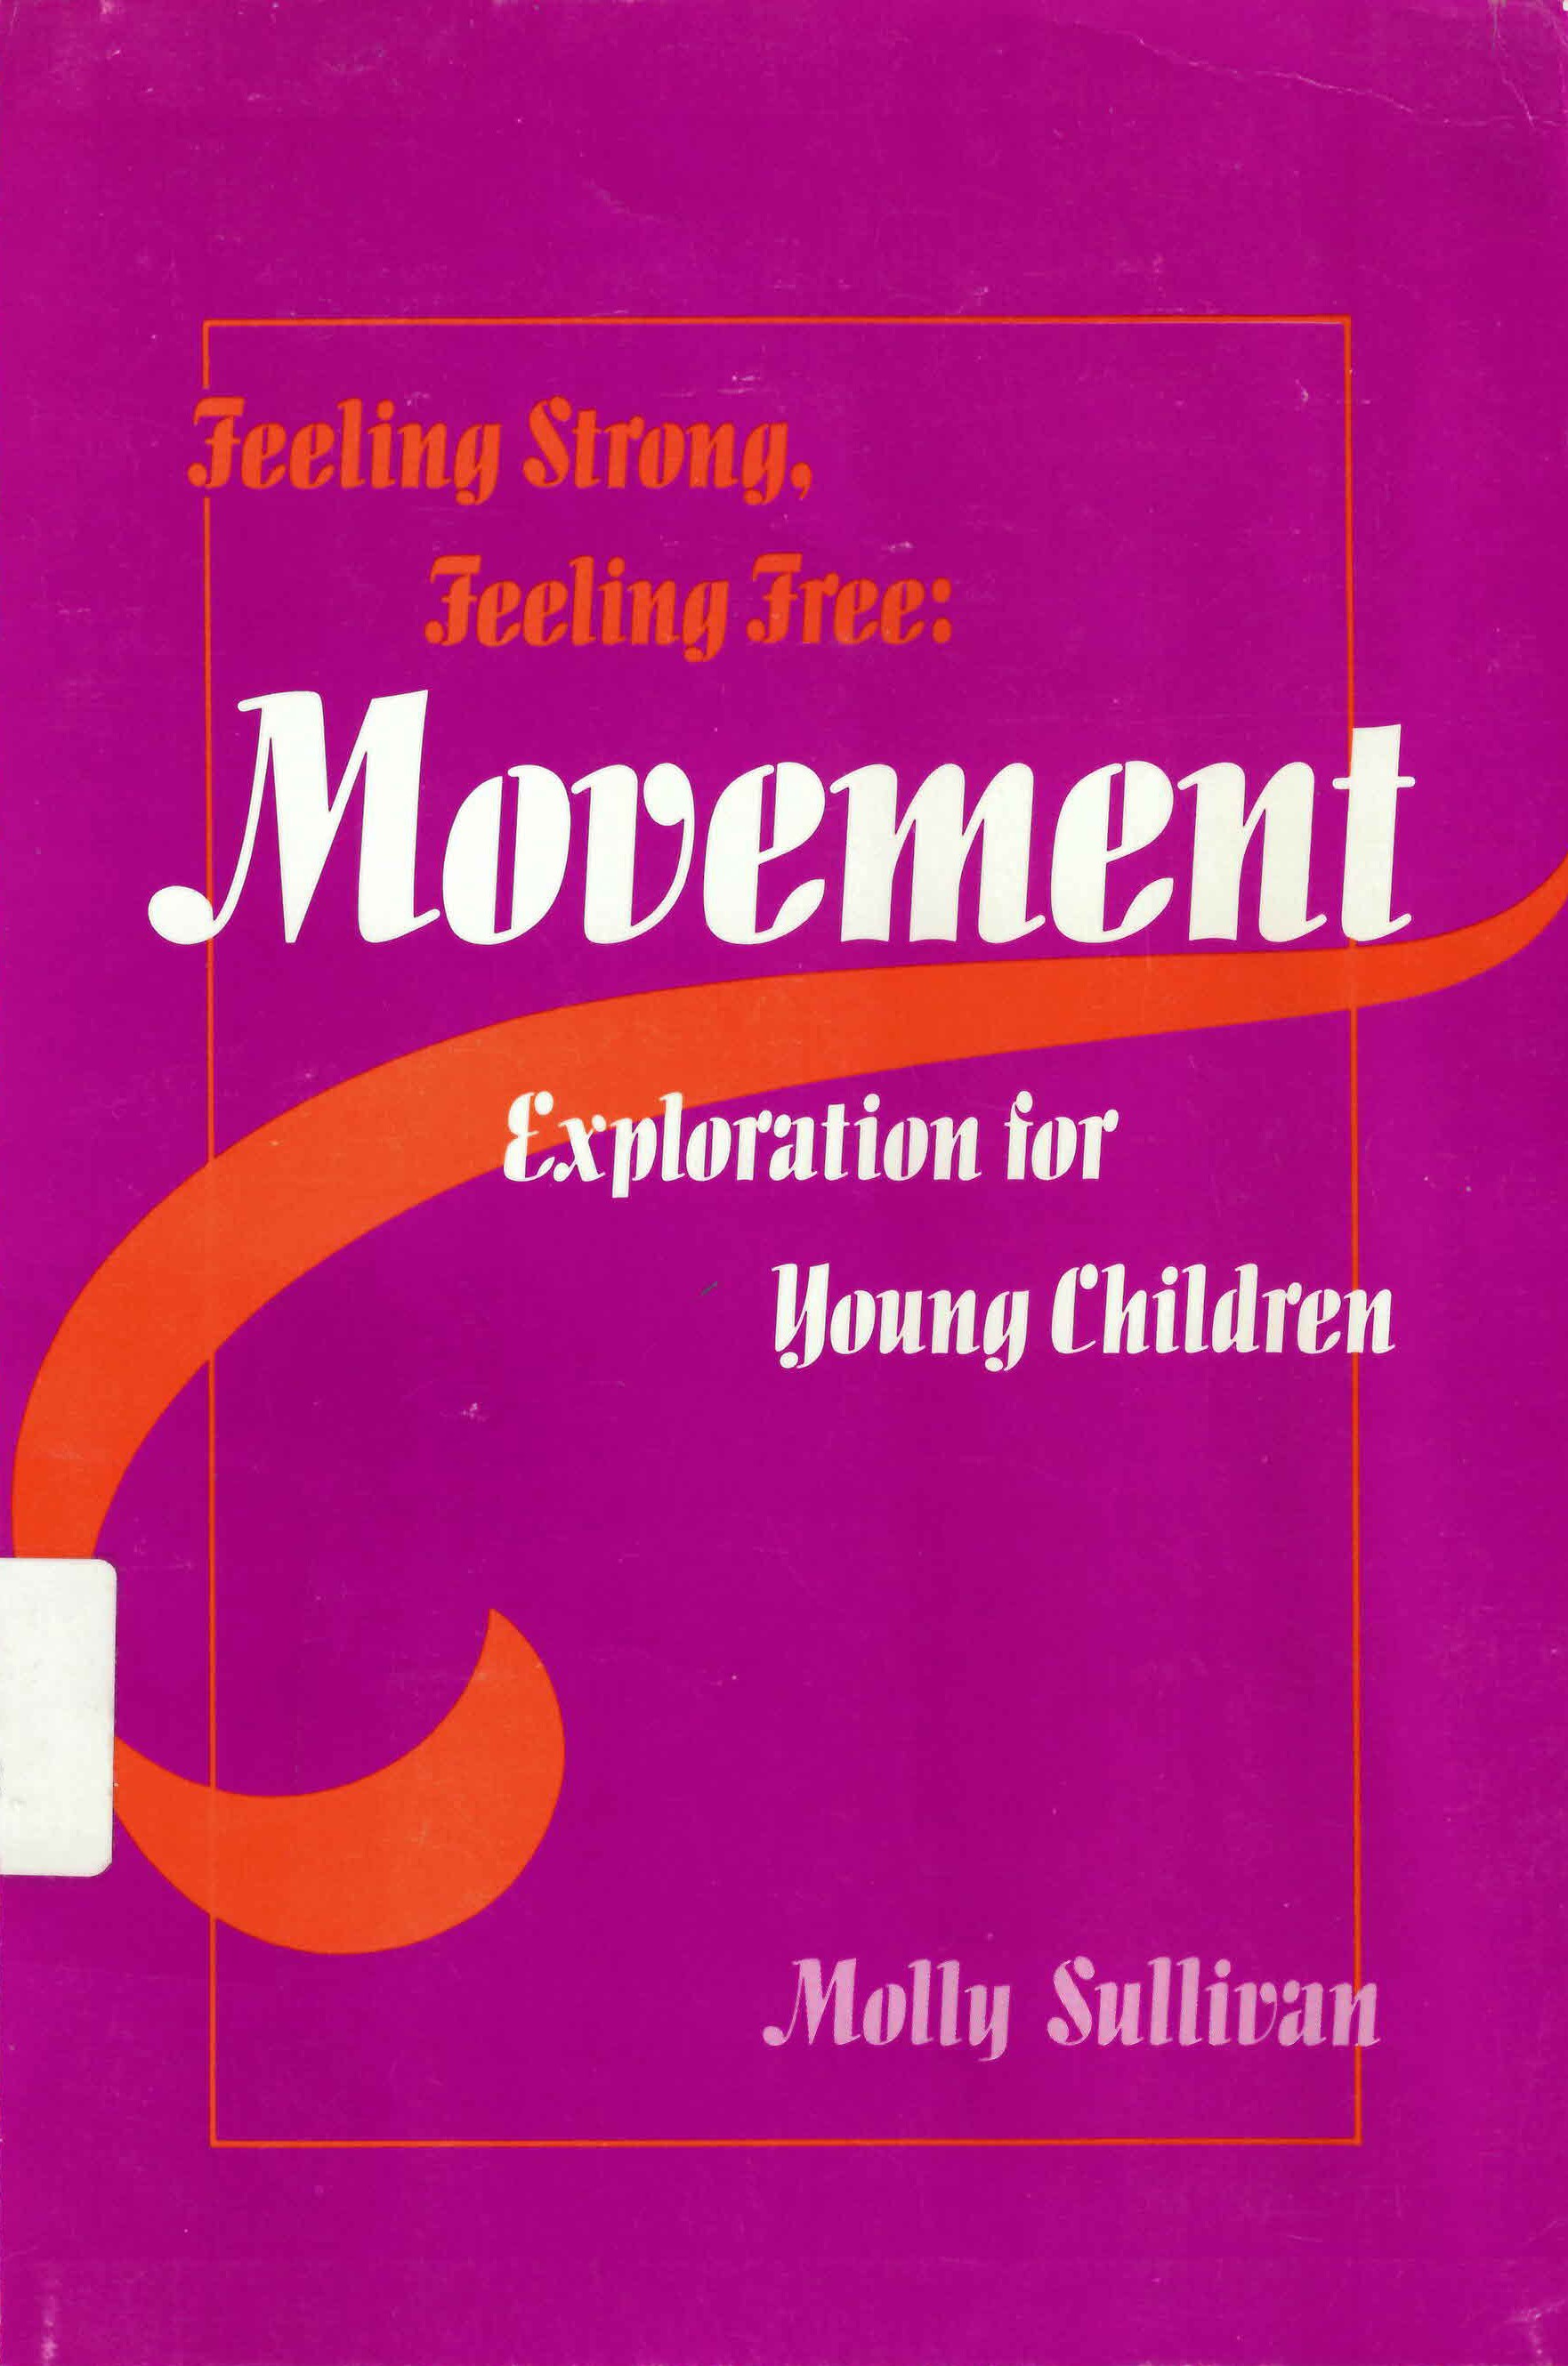 Feeling strong, feeling free: : movement exploration for young children / /